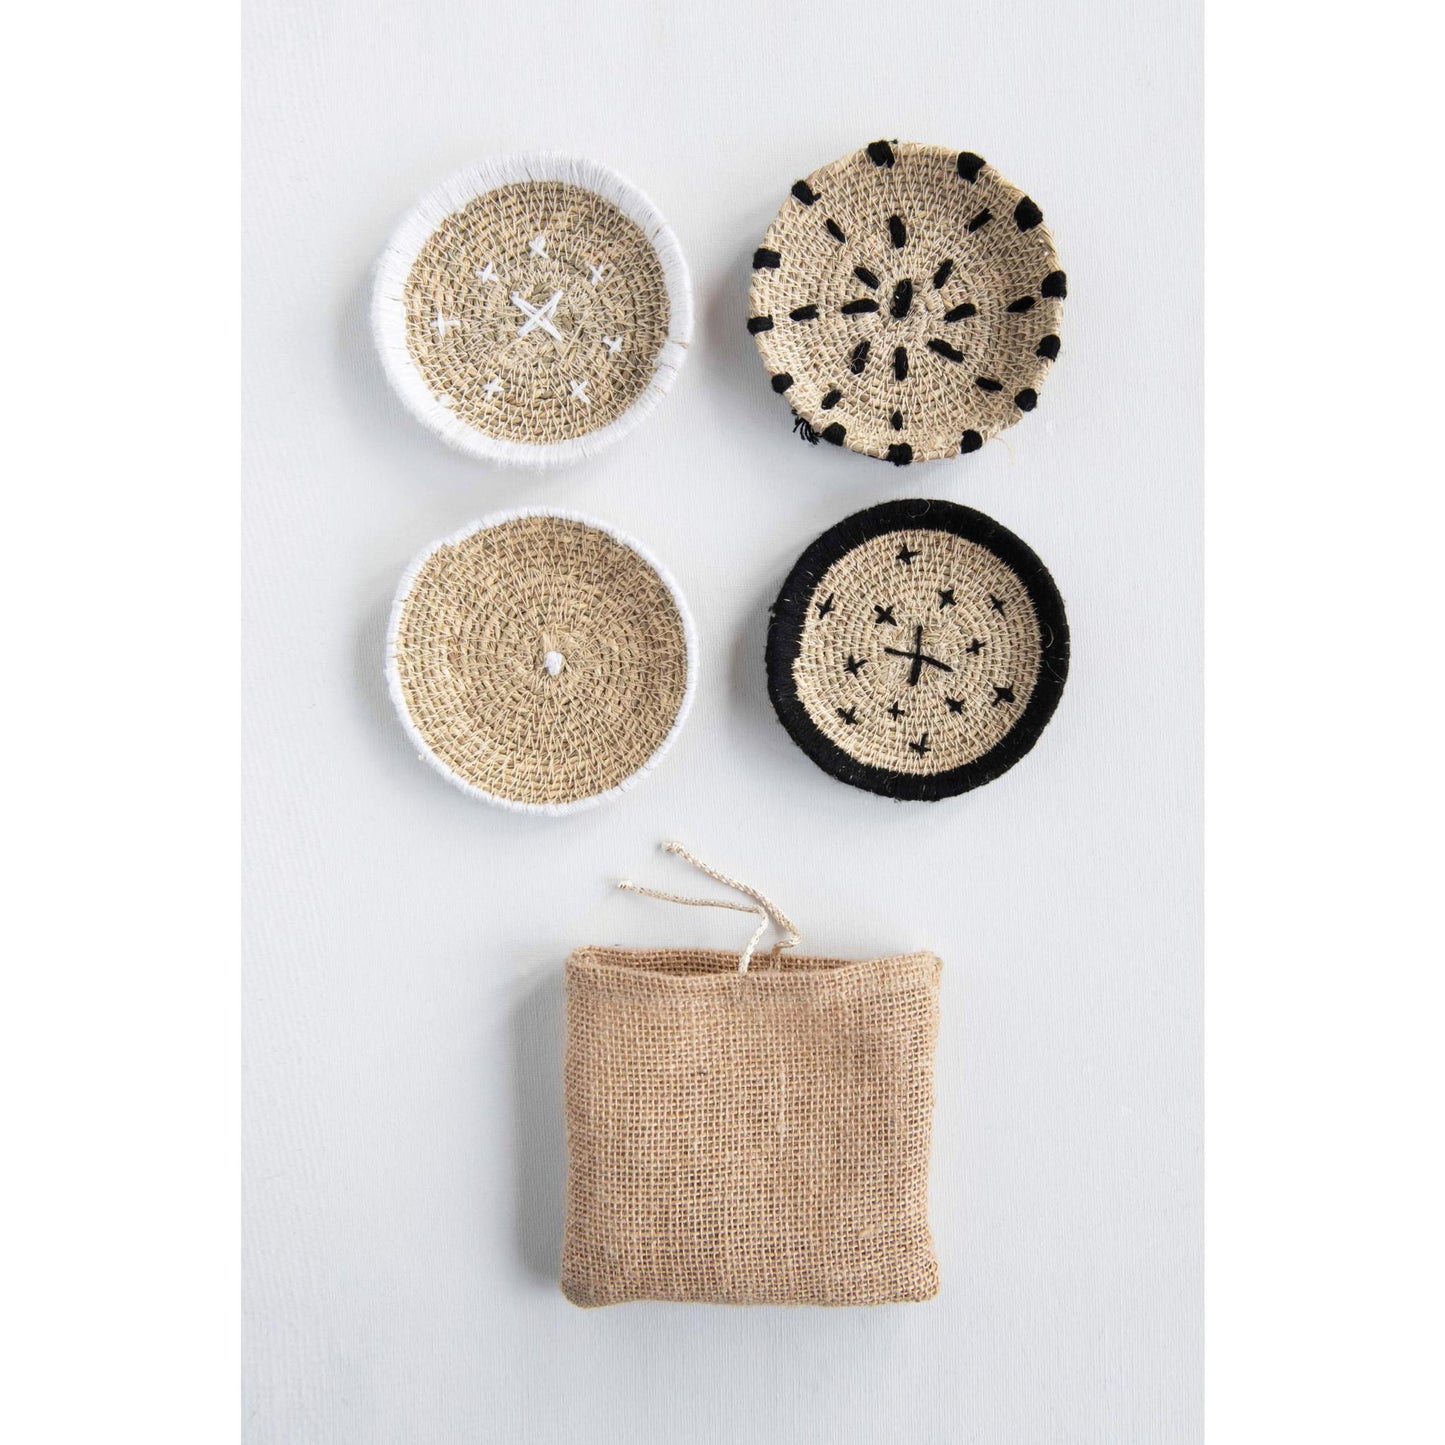 Hand-Woven Coasters with Stitching, Set of 4